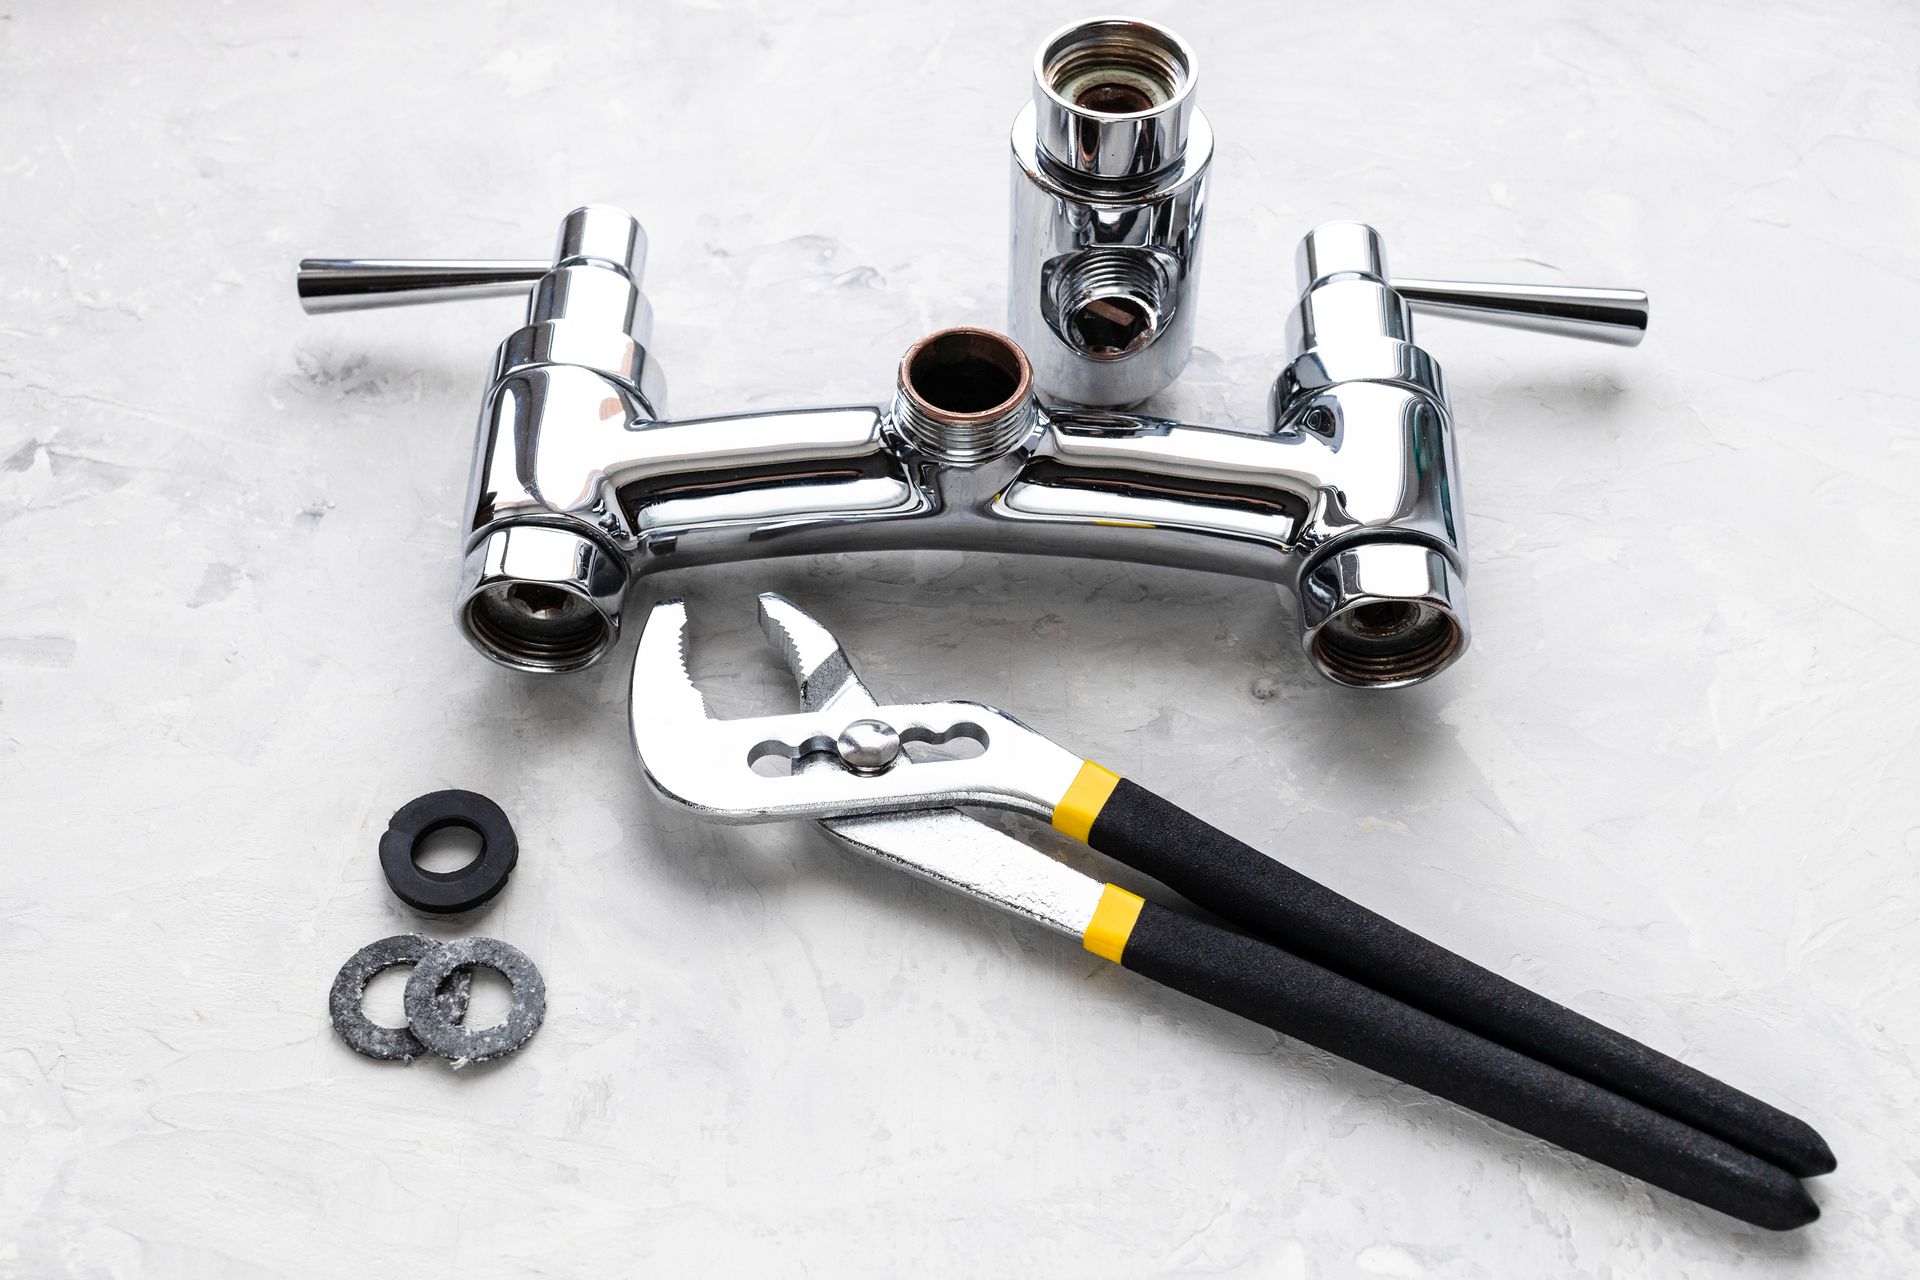 wrench and disassembled shower facet during installation